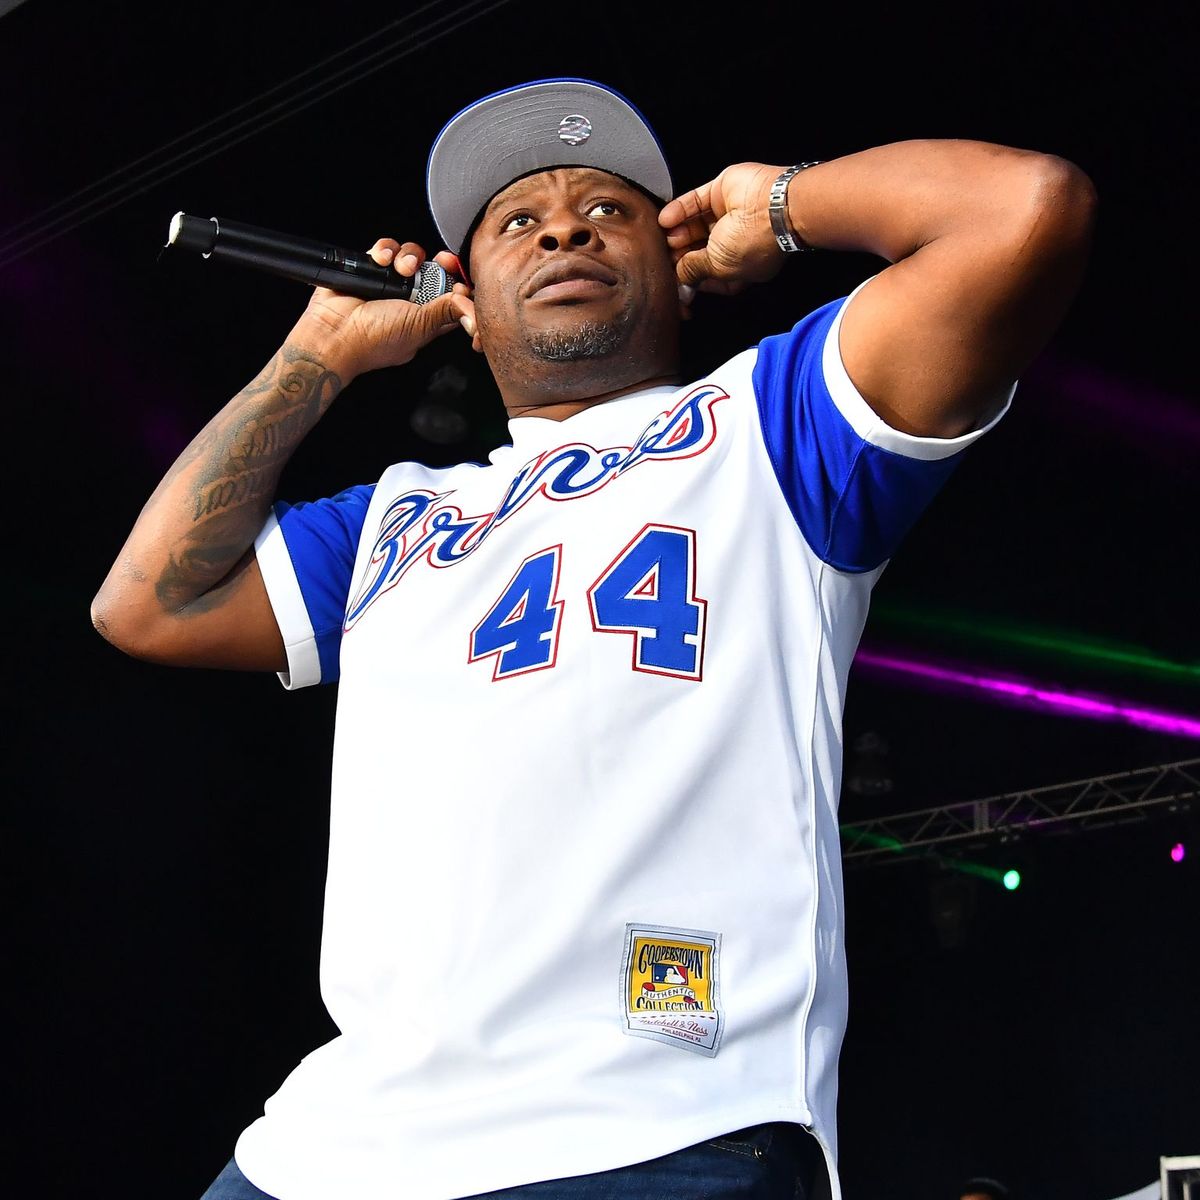  Rapper Scarface onstage during "The Legends of Hip-Hop" concert at Wolf Creek Amphitheater on July 28, 2018 in Atlanta, Georgia | Photo: Getty Images